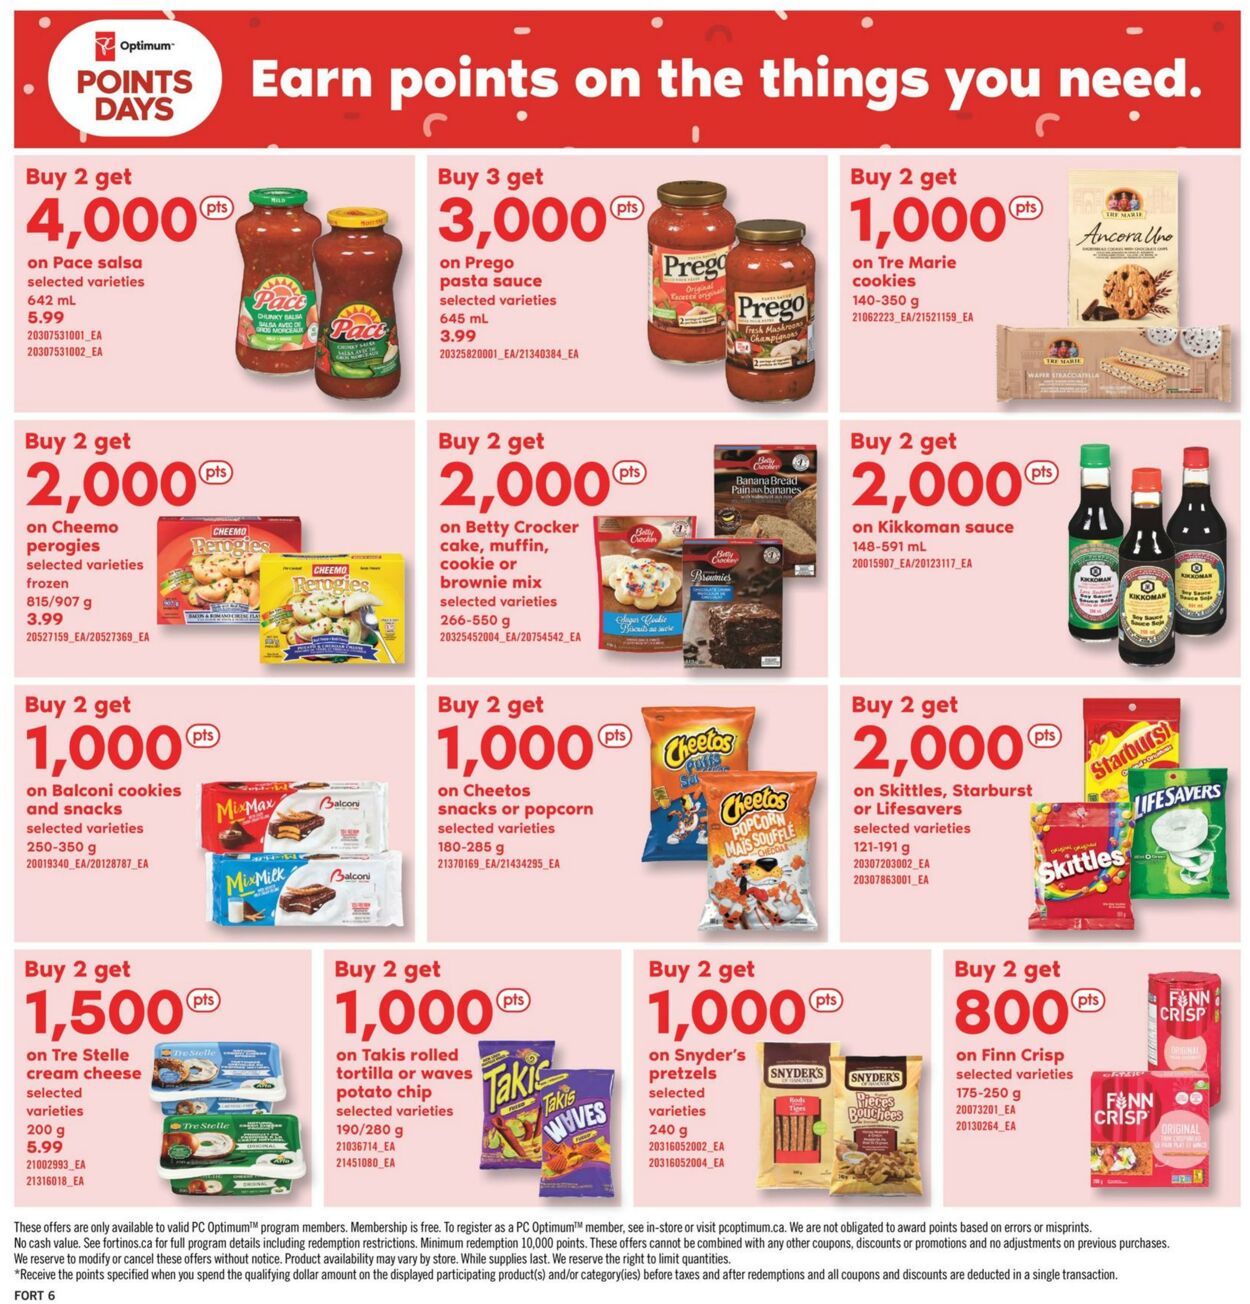 Fortinos Flyer from 09/21/2023